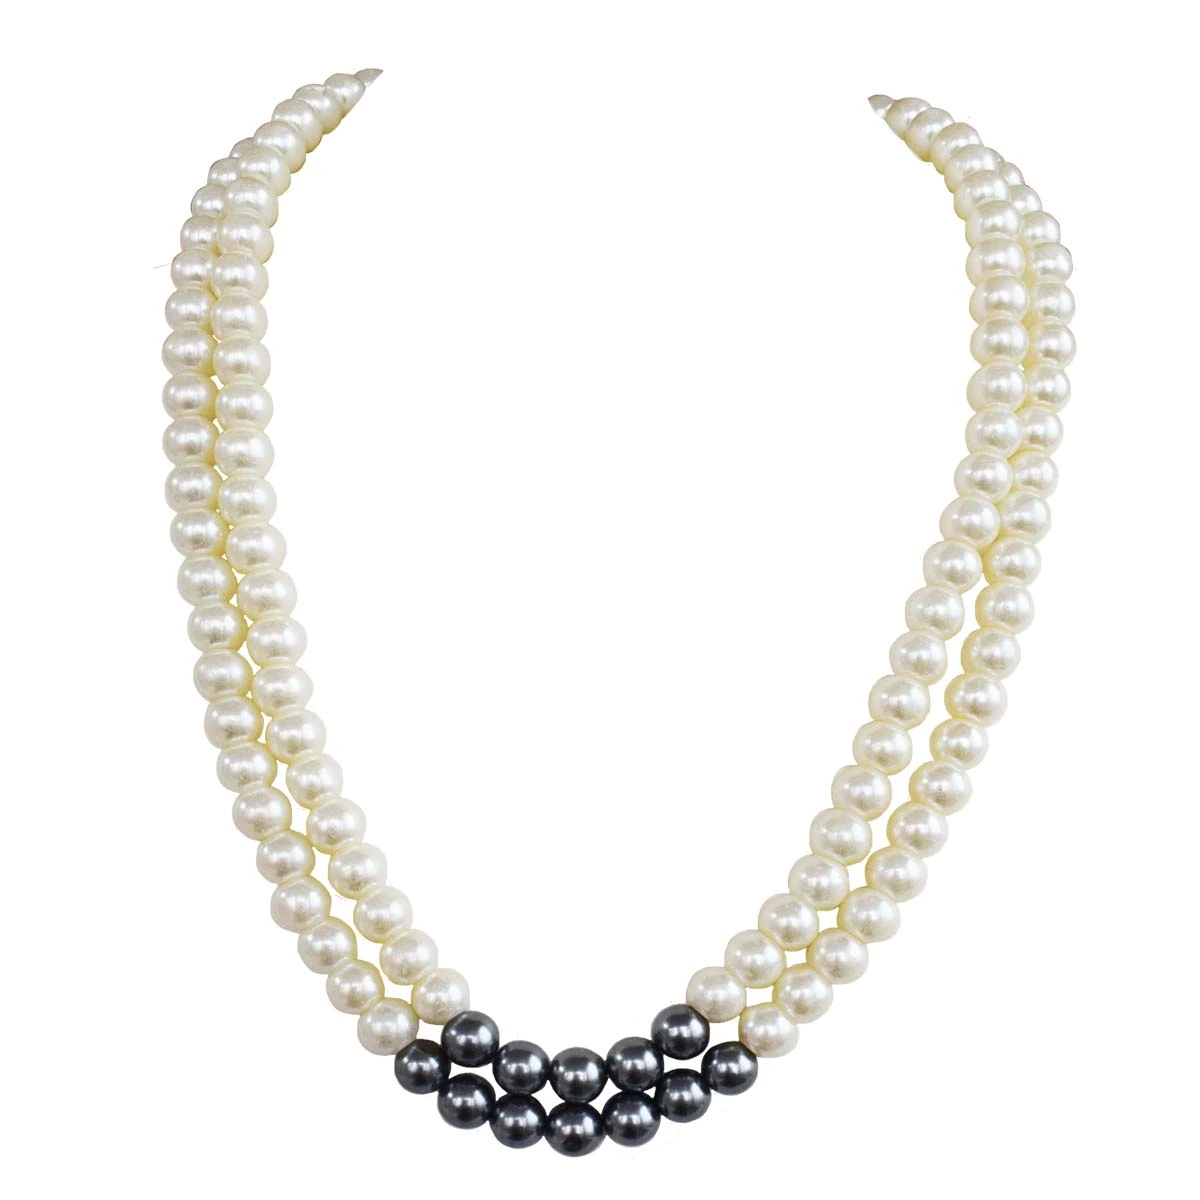 2 Line White & Gray Shell Pearl Necklace for Women (PS577)